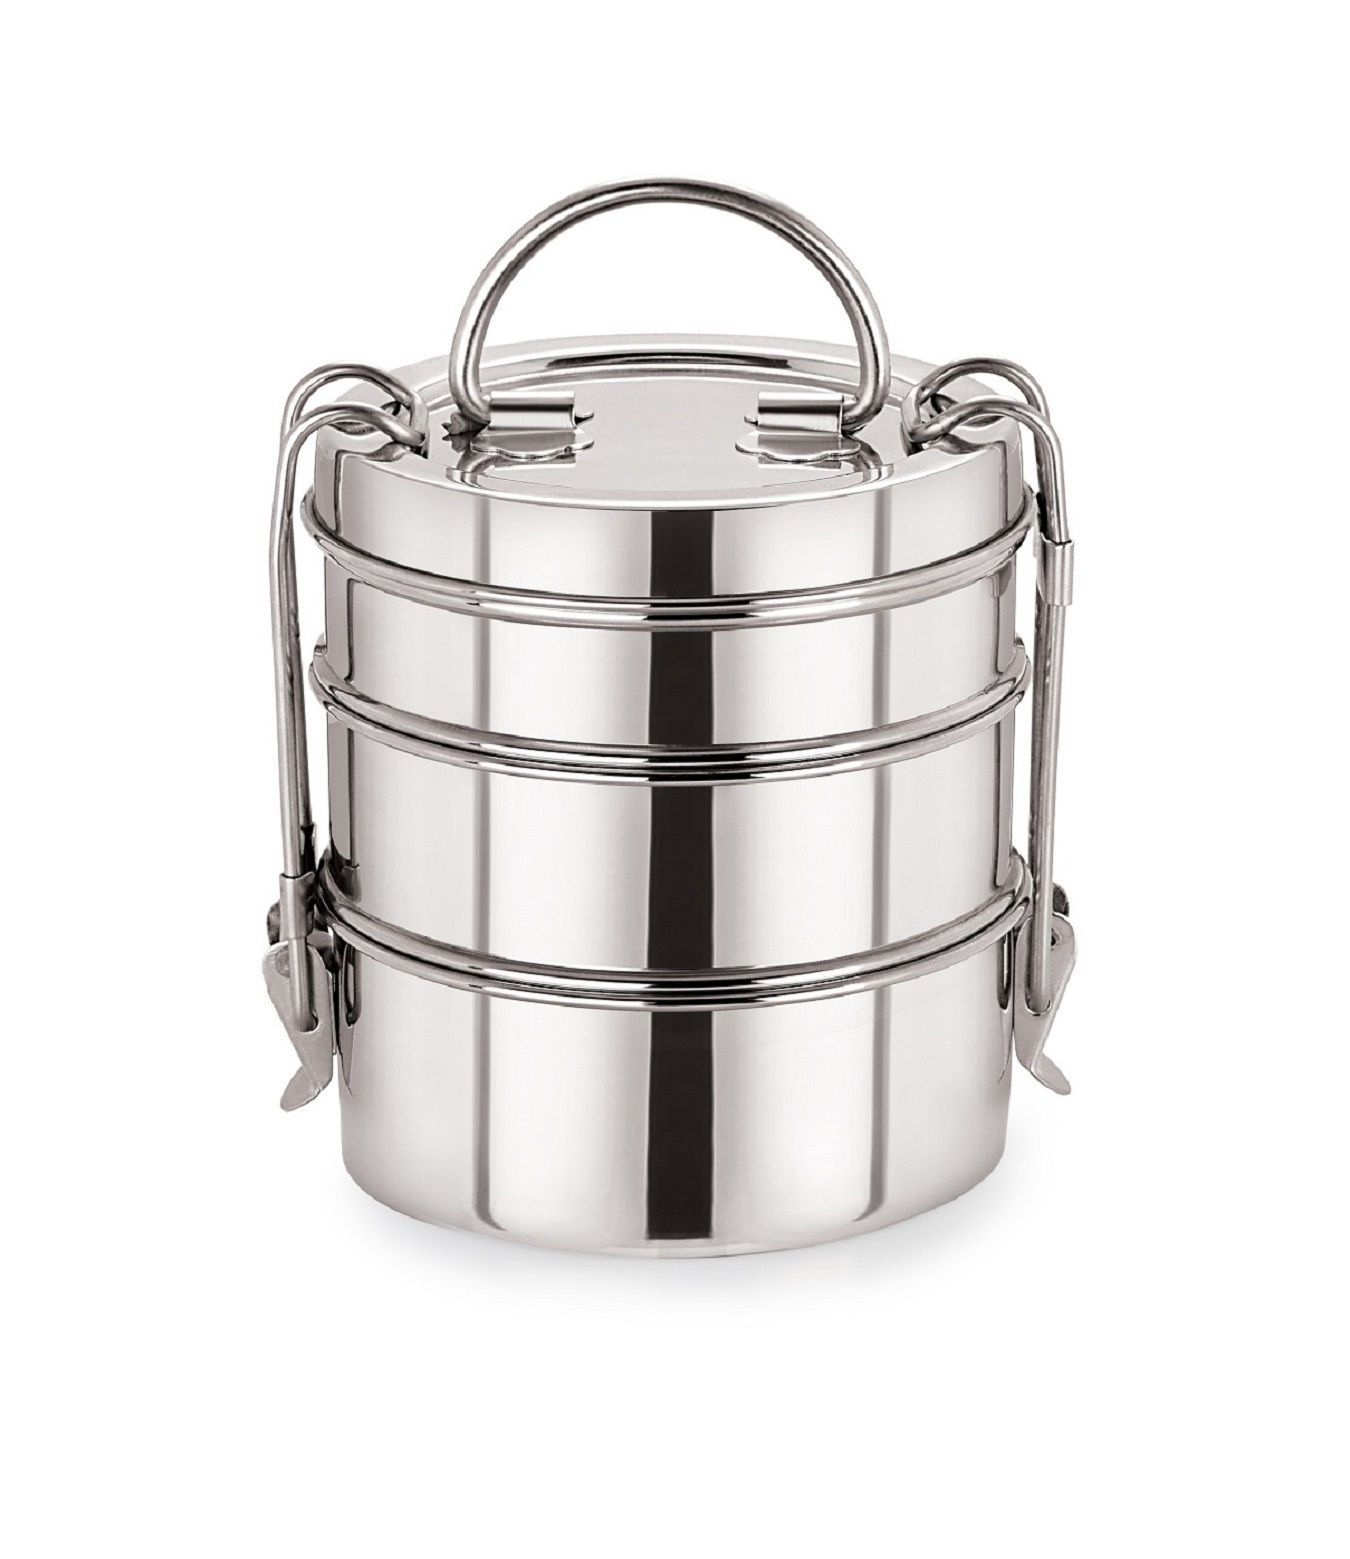     			Neelam Clipper Stainless Steel Tiffin Box Set, 3-Container, Silver-2150 ml